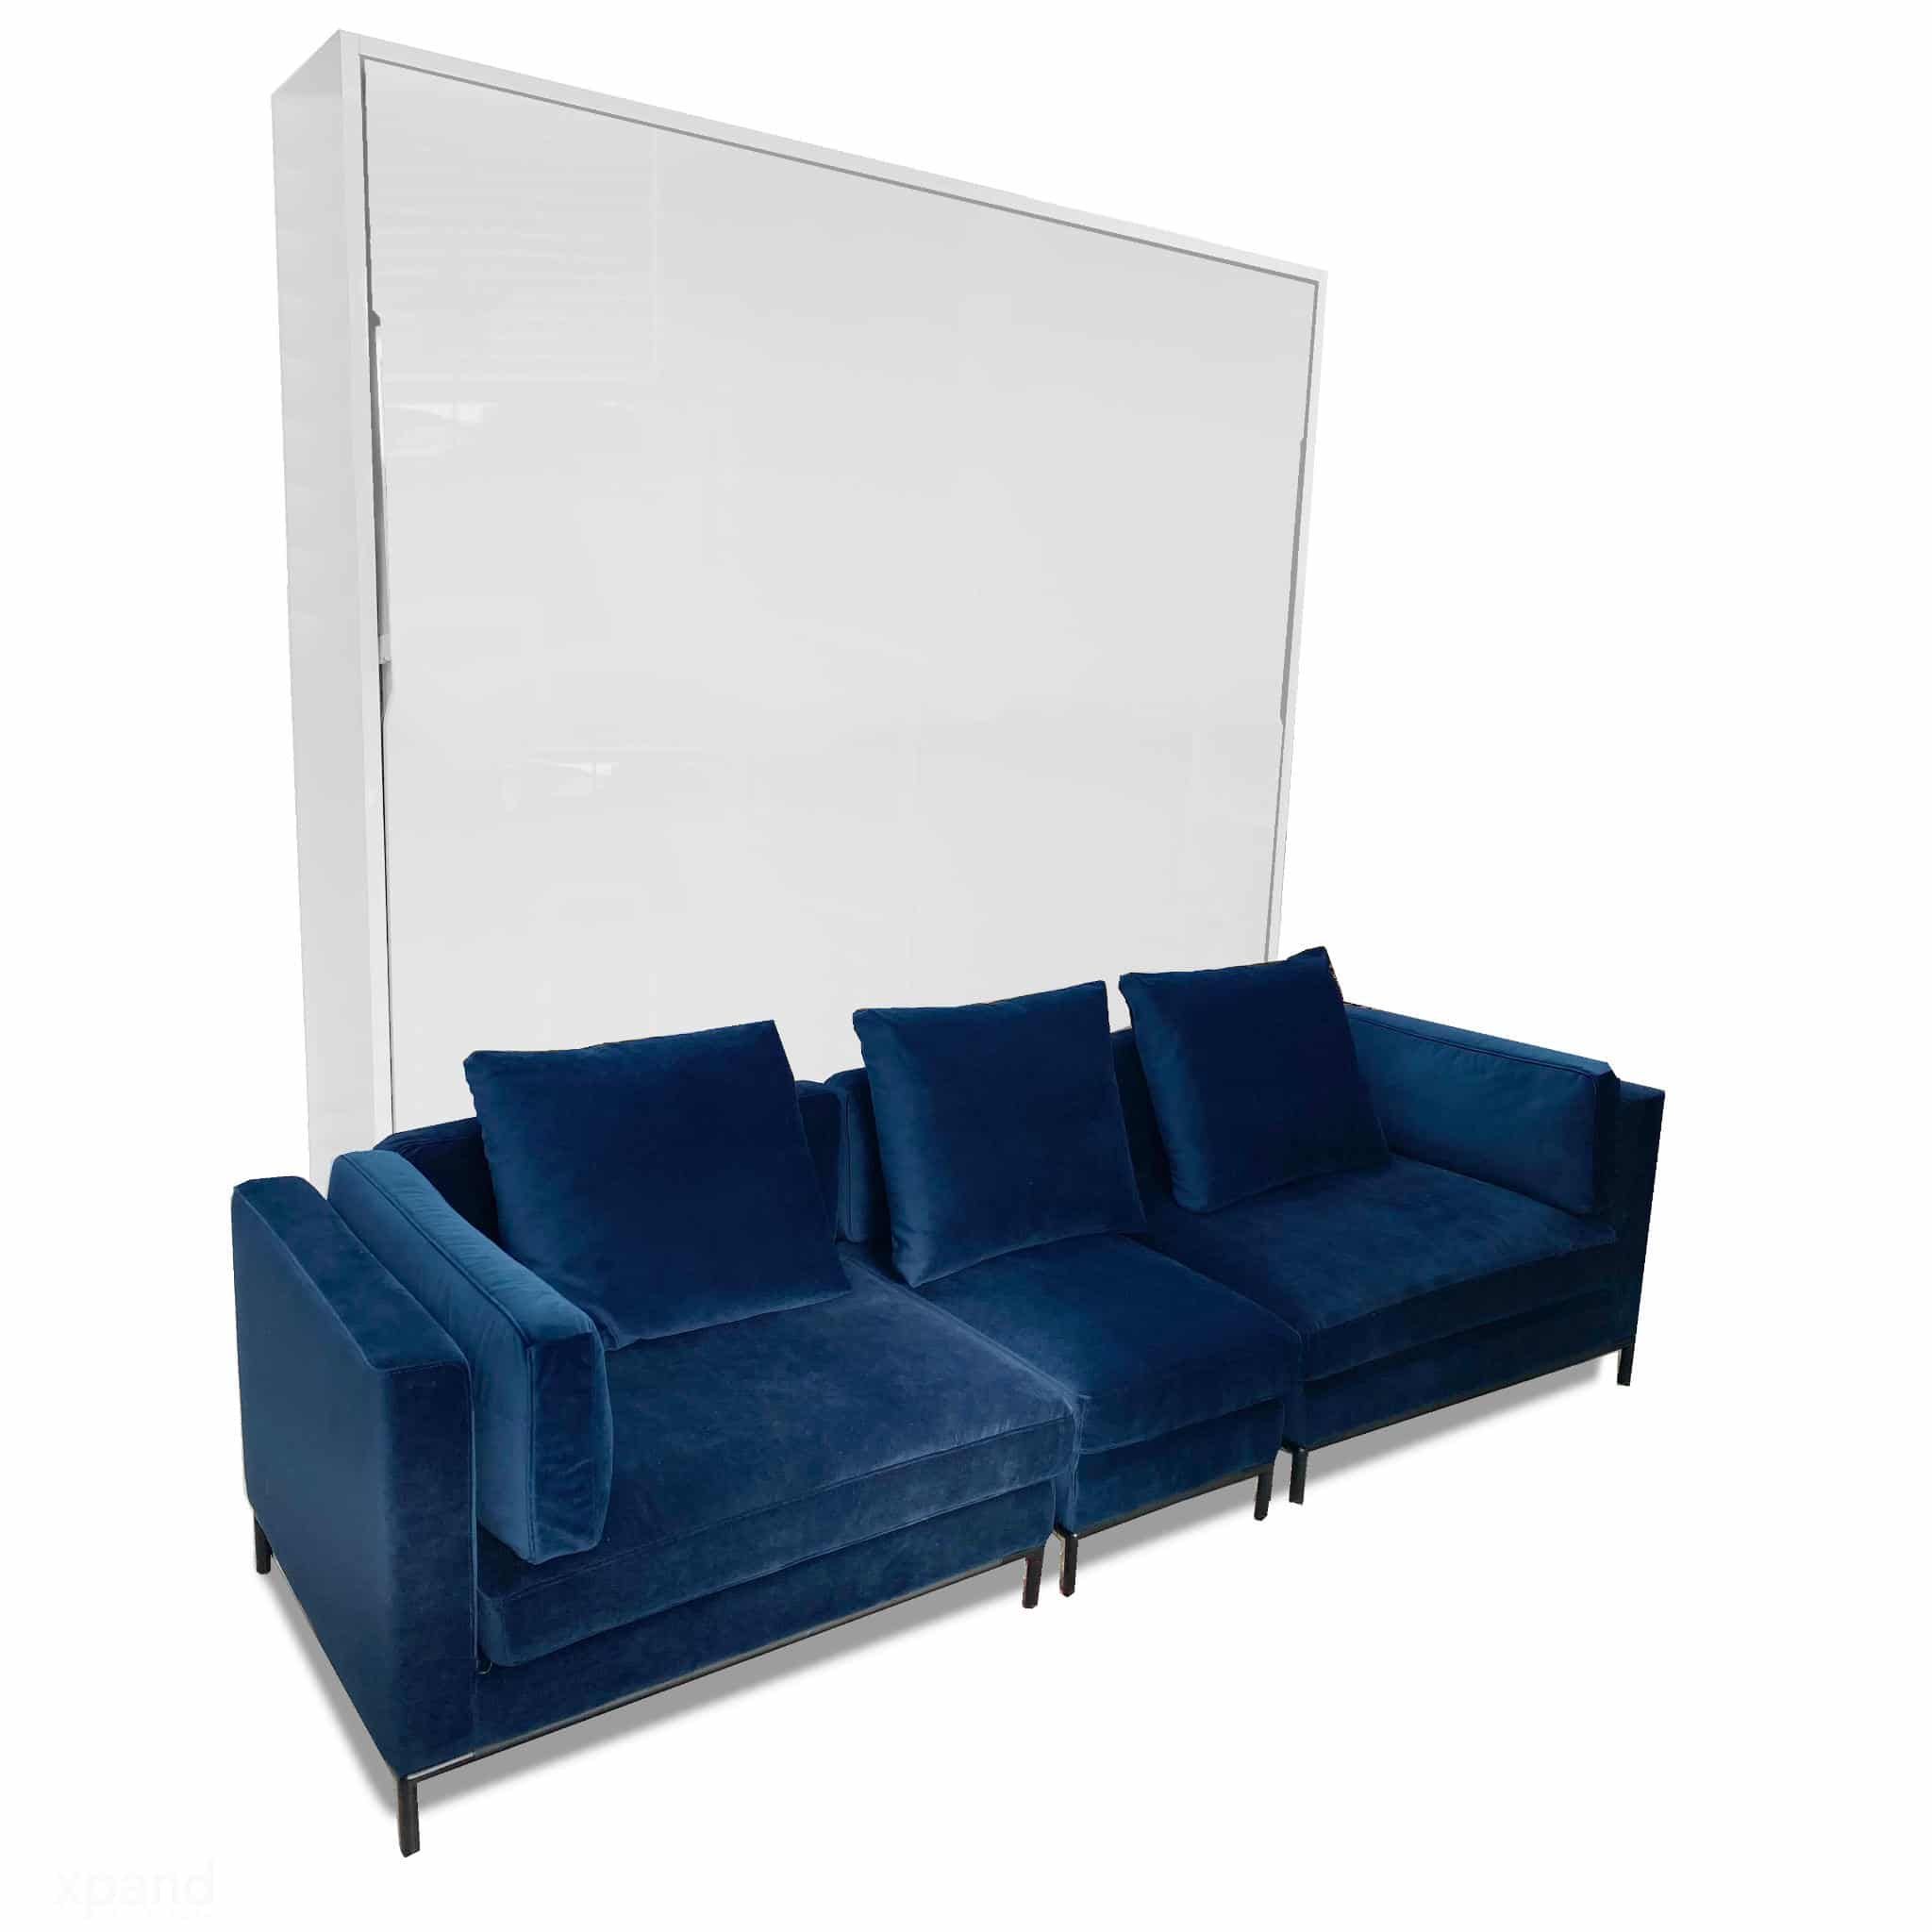 Murphysofa Navy Blue Migliore Modular King Size Wall Bed Sofa Pertaining To Navy Sleeper Sofa Couches (View 13 of 15)